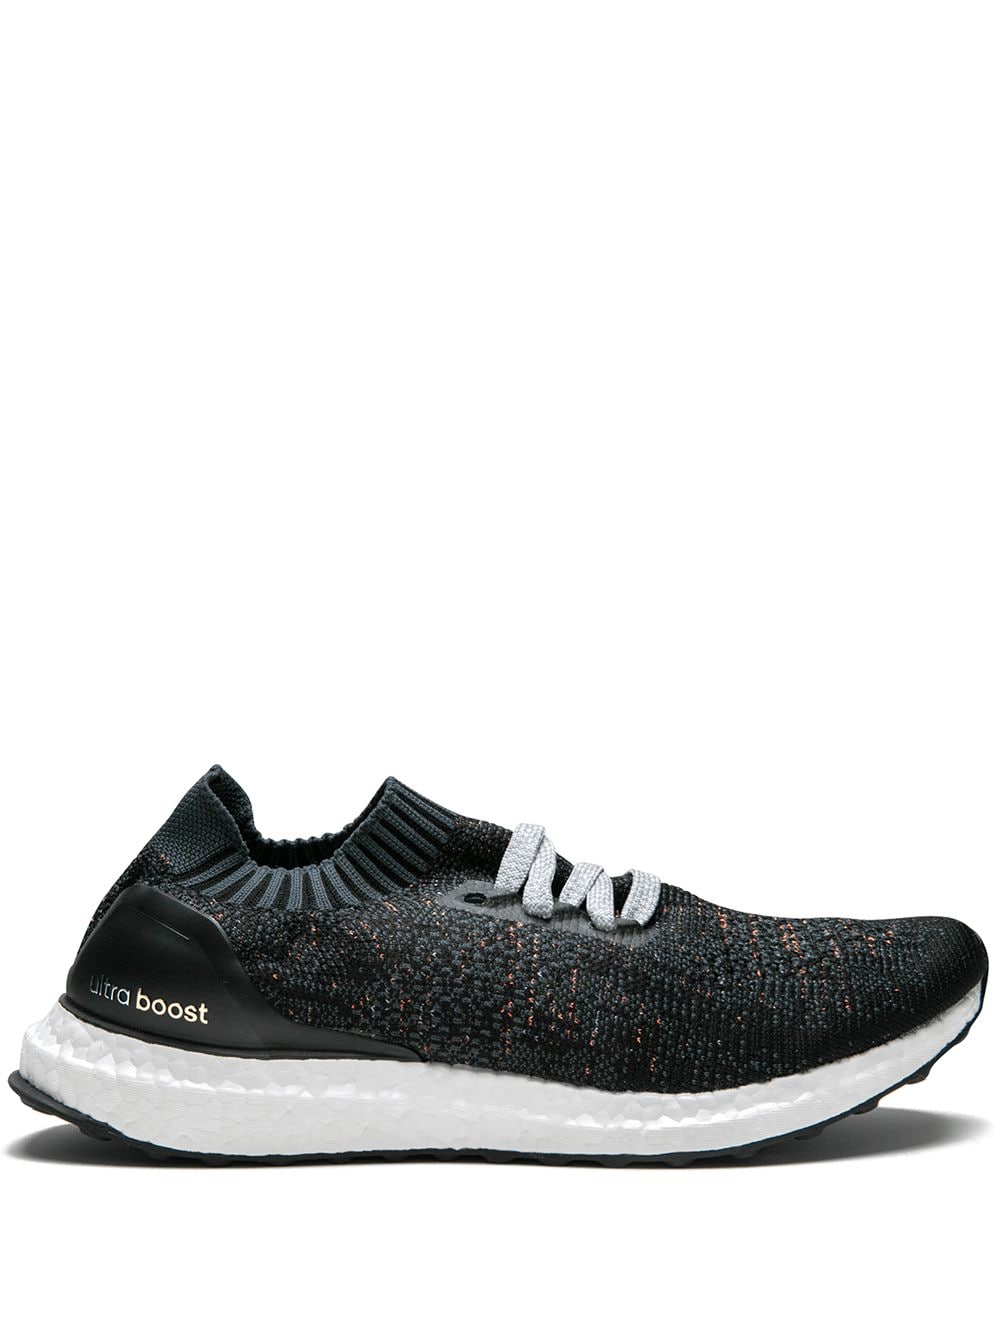 adidas ultra boost uncaged in store